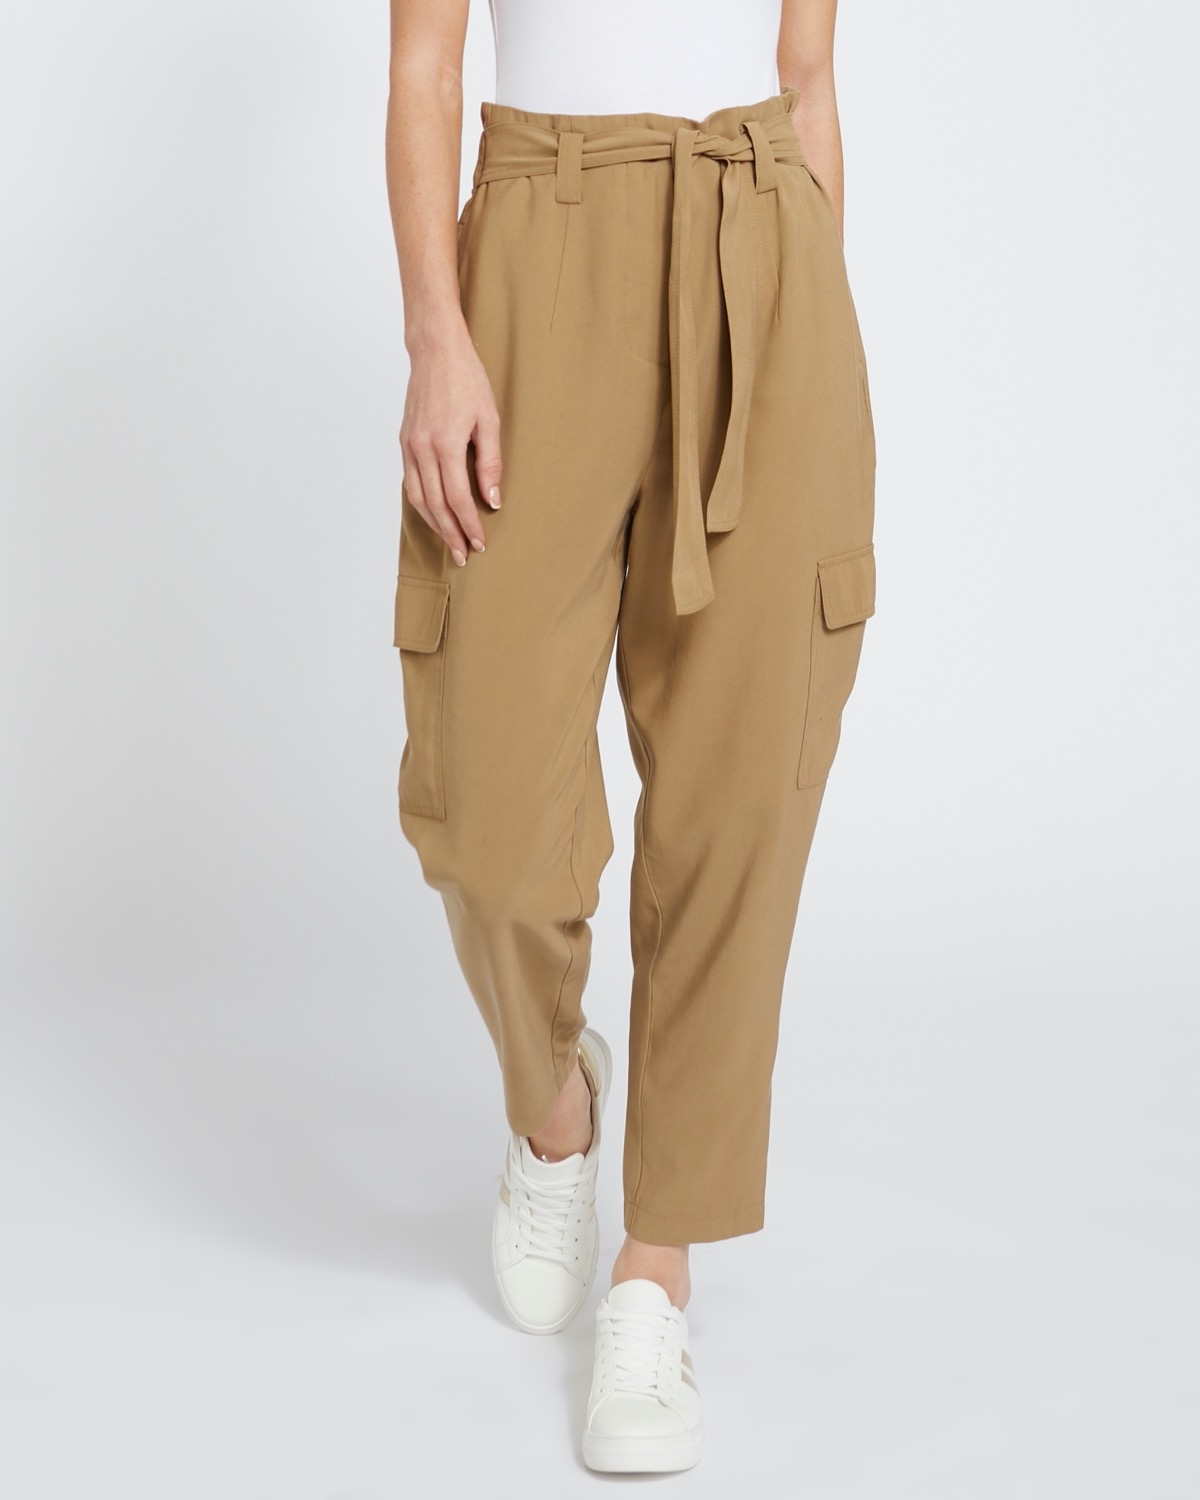 Buy online Lace Up Detail Belted Cargo Pants from bottom wear for Women by  Xee for 2249 at 10 off  2023 Limeroadcom